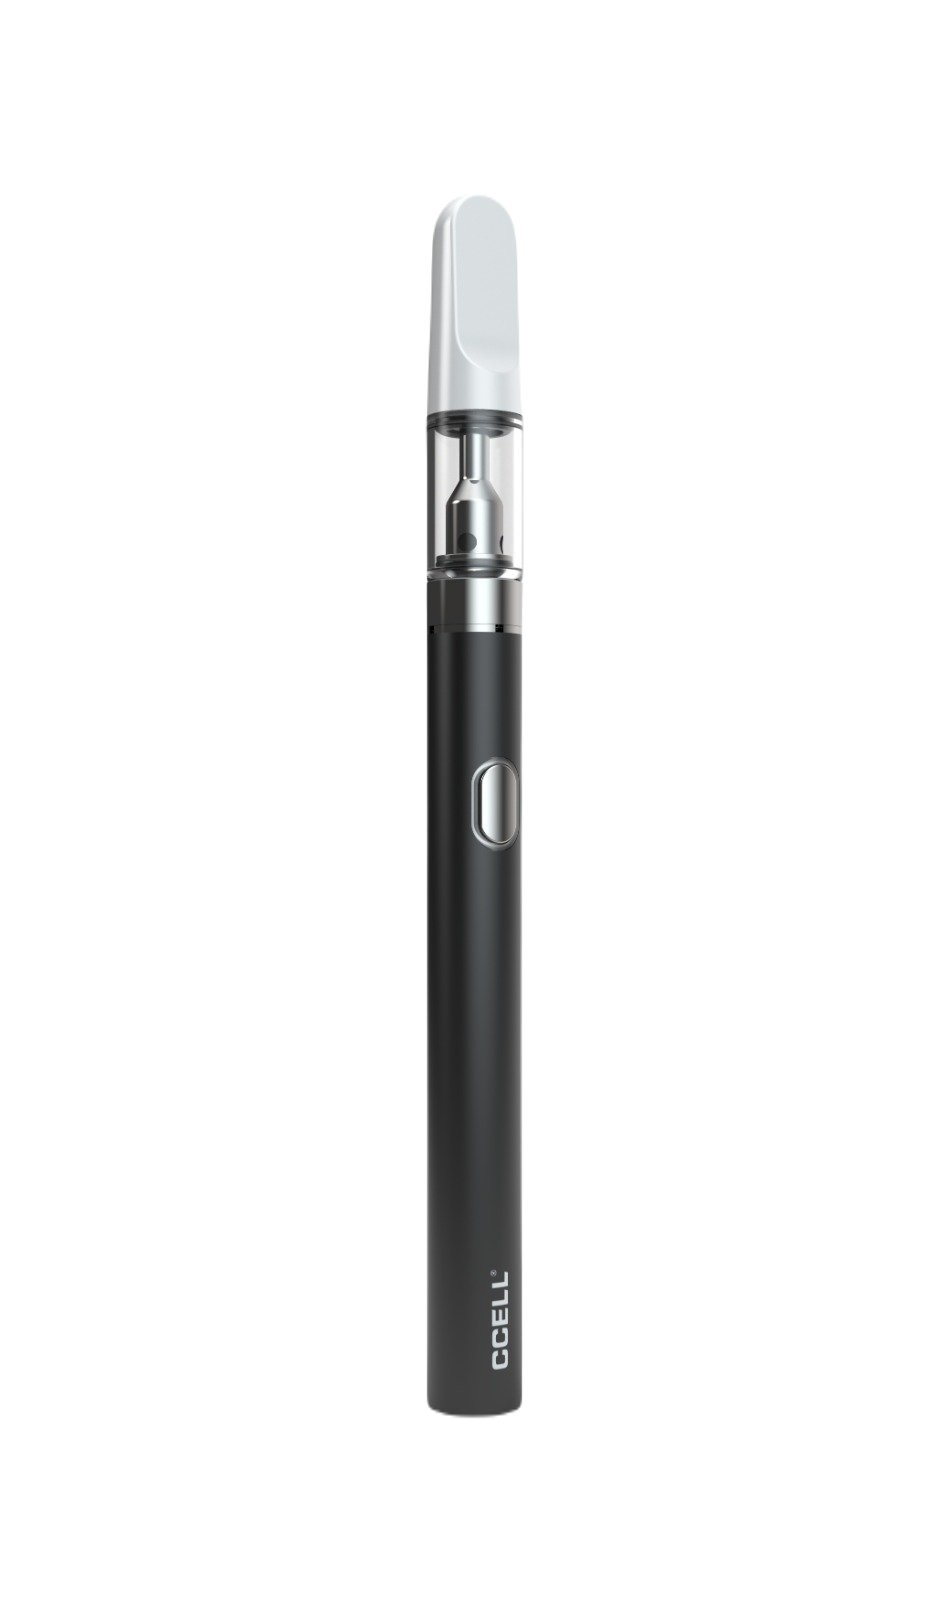 ccell-m3b-1